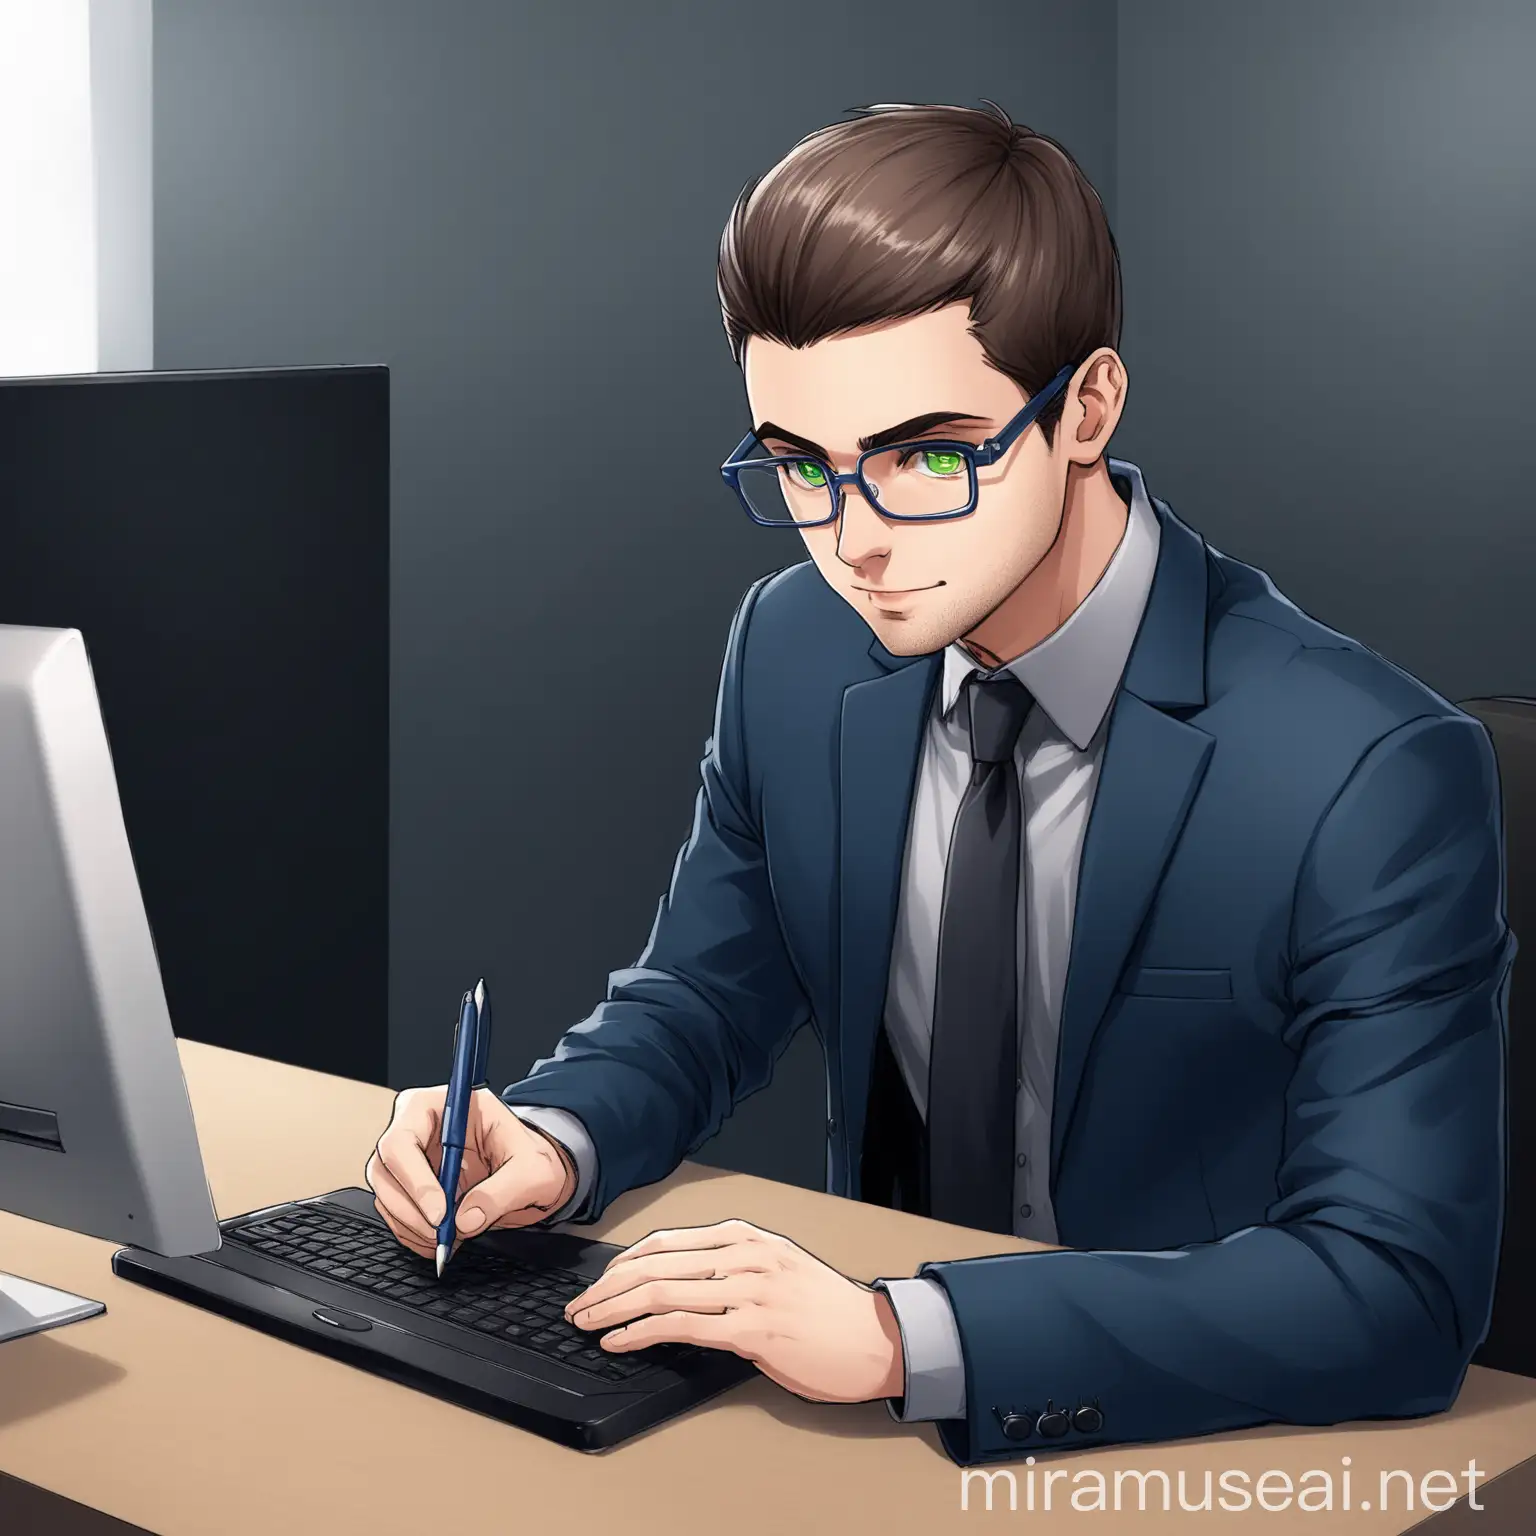 Professional Project Manager Working at Desk in Dark Blue Suit